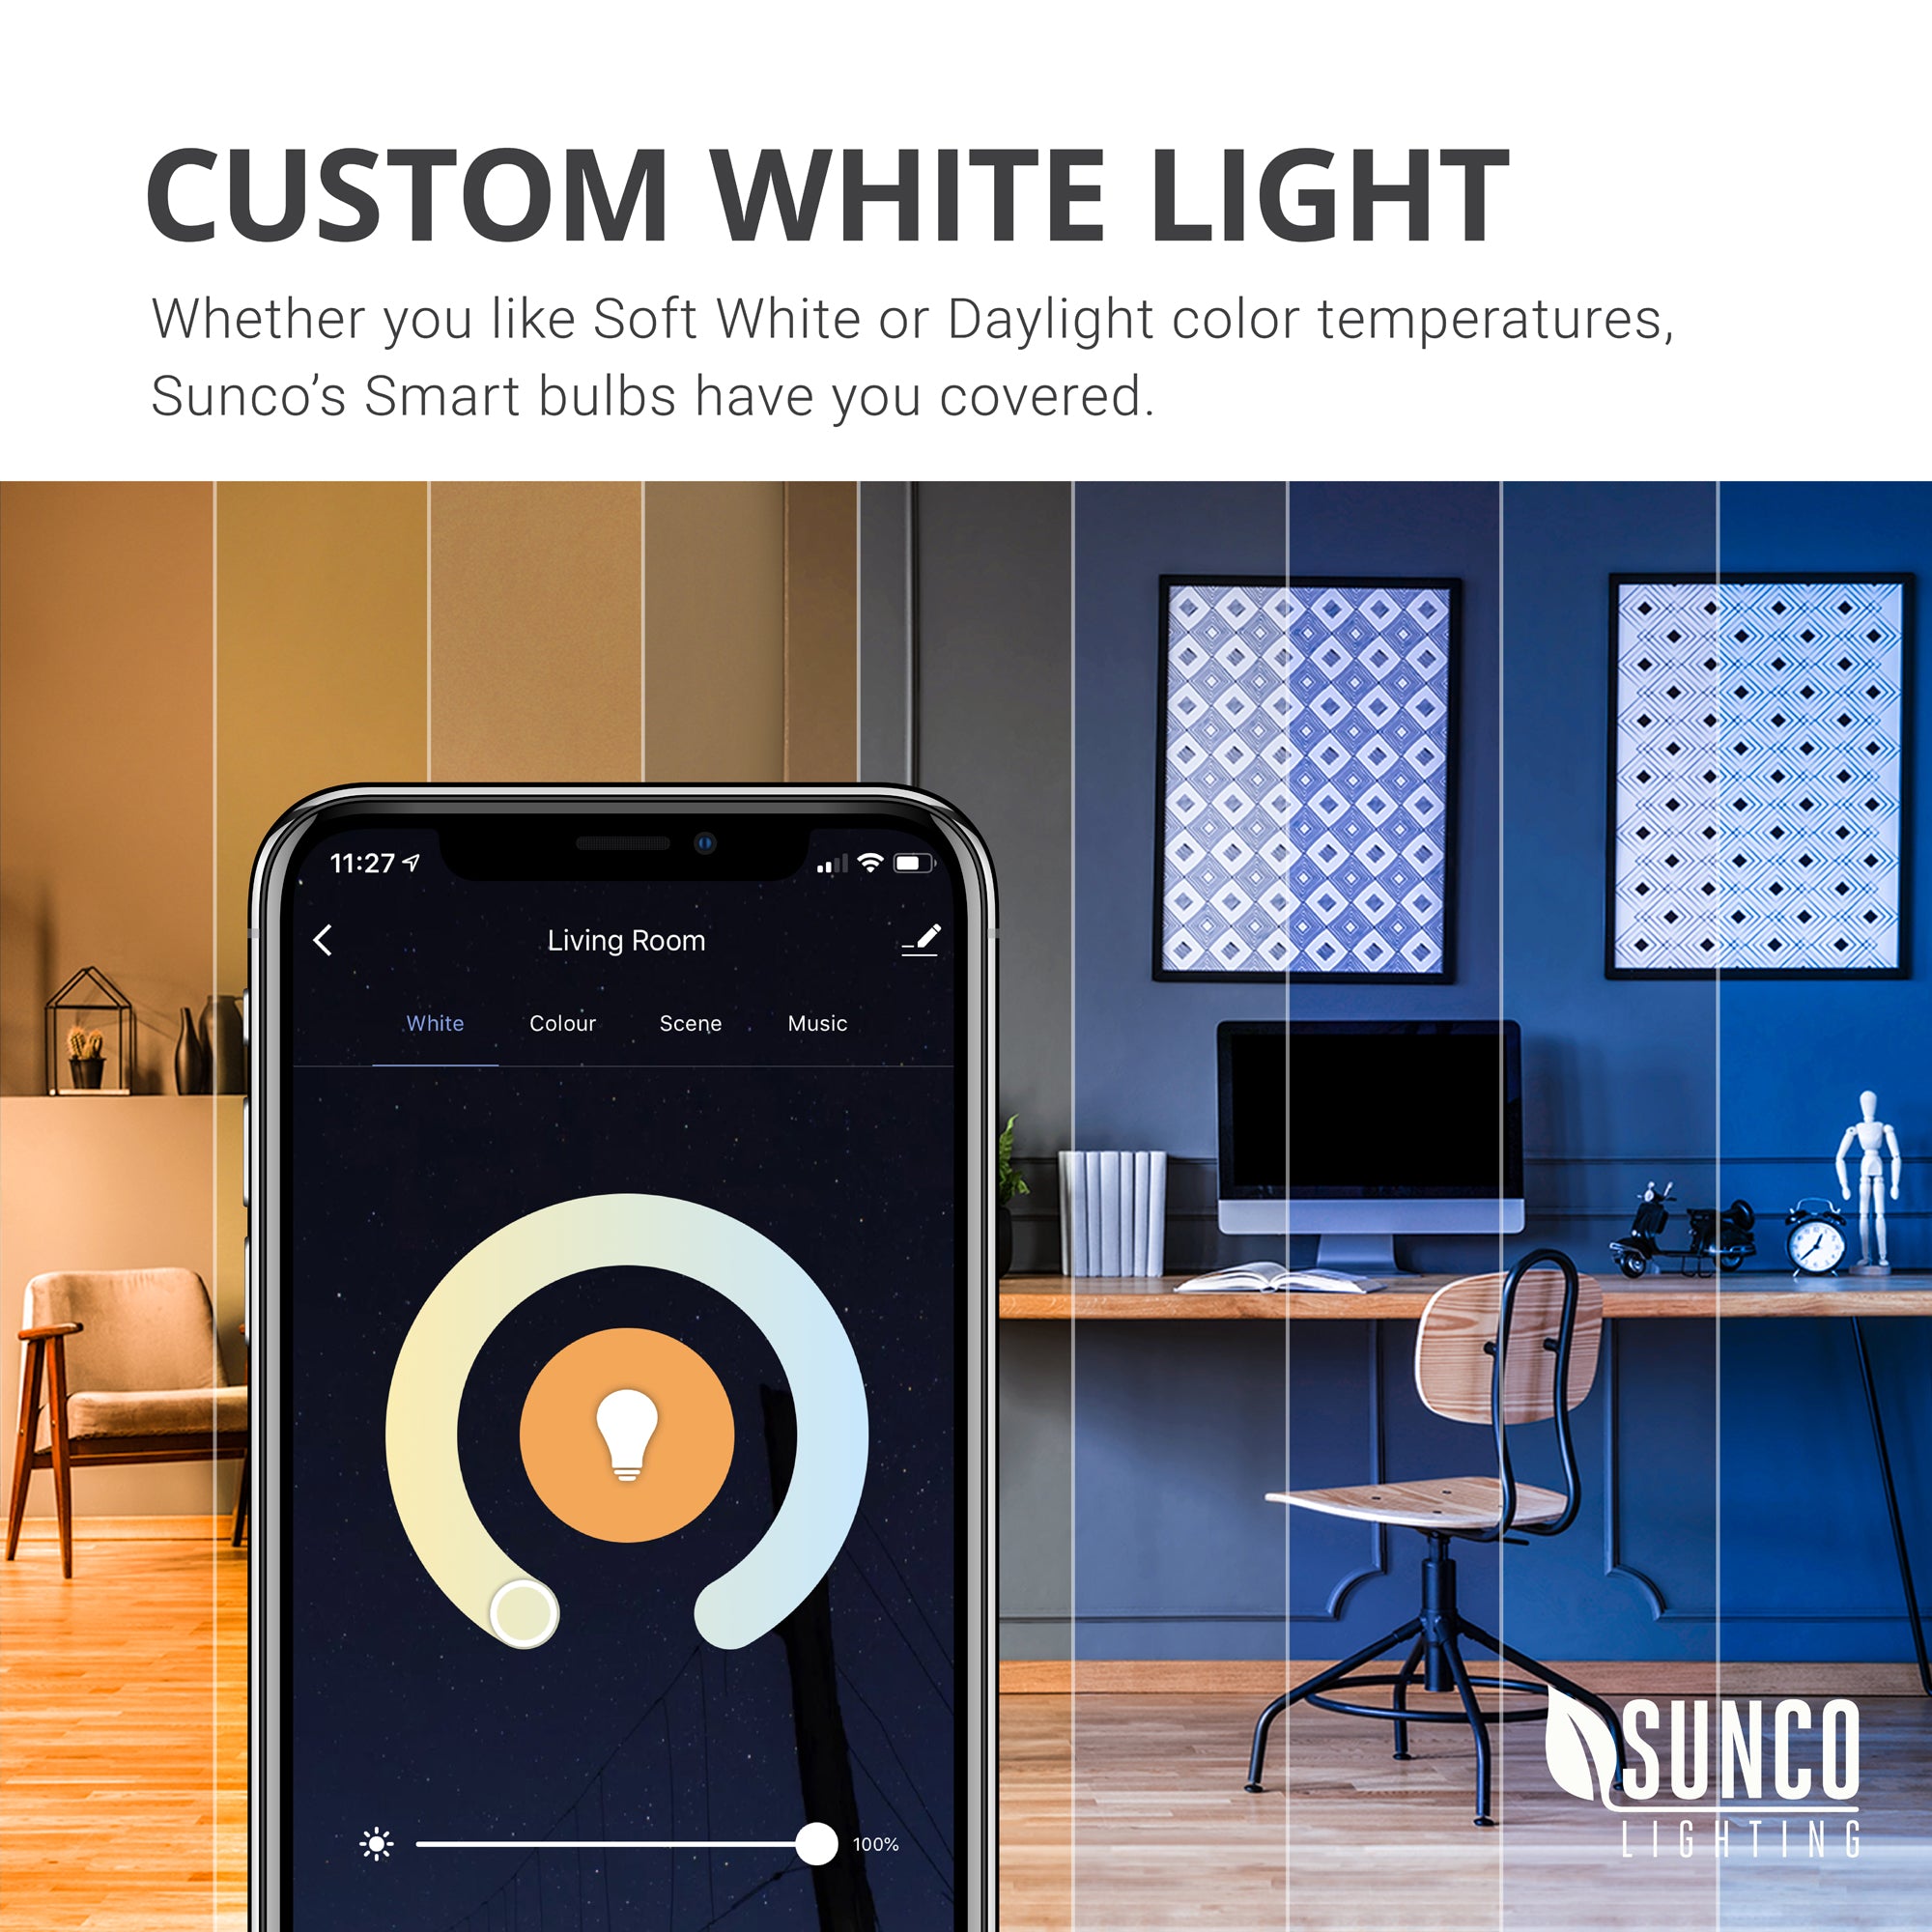 Custom White Light. Whether you light Soft White or Daylight color temperatures, Sunco Lighting LED Smart Bulbs like this PAR30 LED Smart Bulb have you covered. Use the easy color wheel to swipe and select the CCT white light color temperature you prefer in each room. Image shows a closeup of the easy app on a smart phone and a simulation in an office and living room of warm to cool color temperatures to show the light quality choices available with just a single smart bulb.